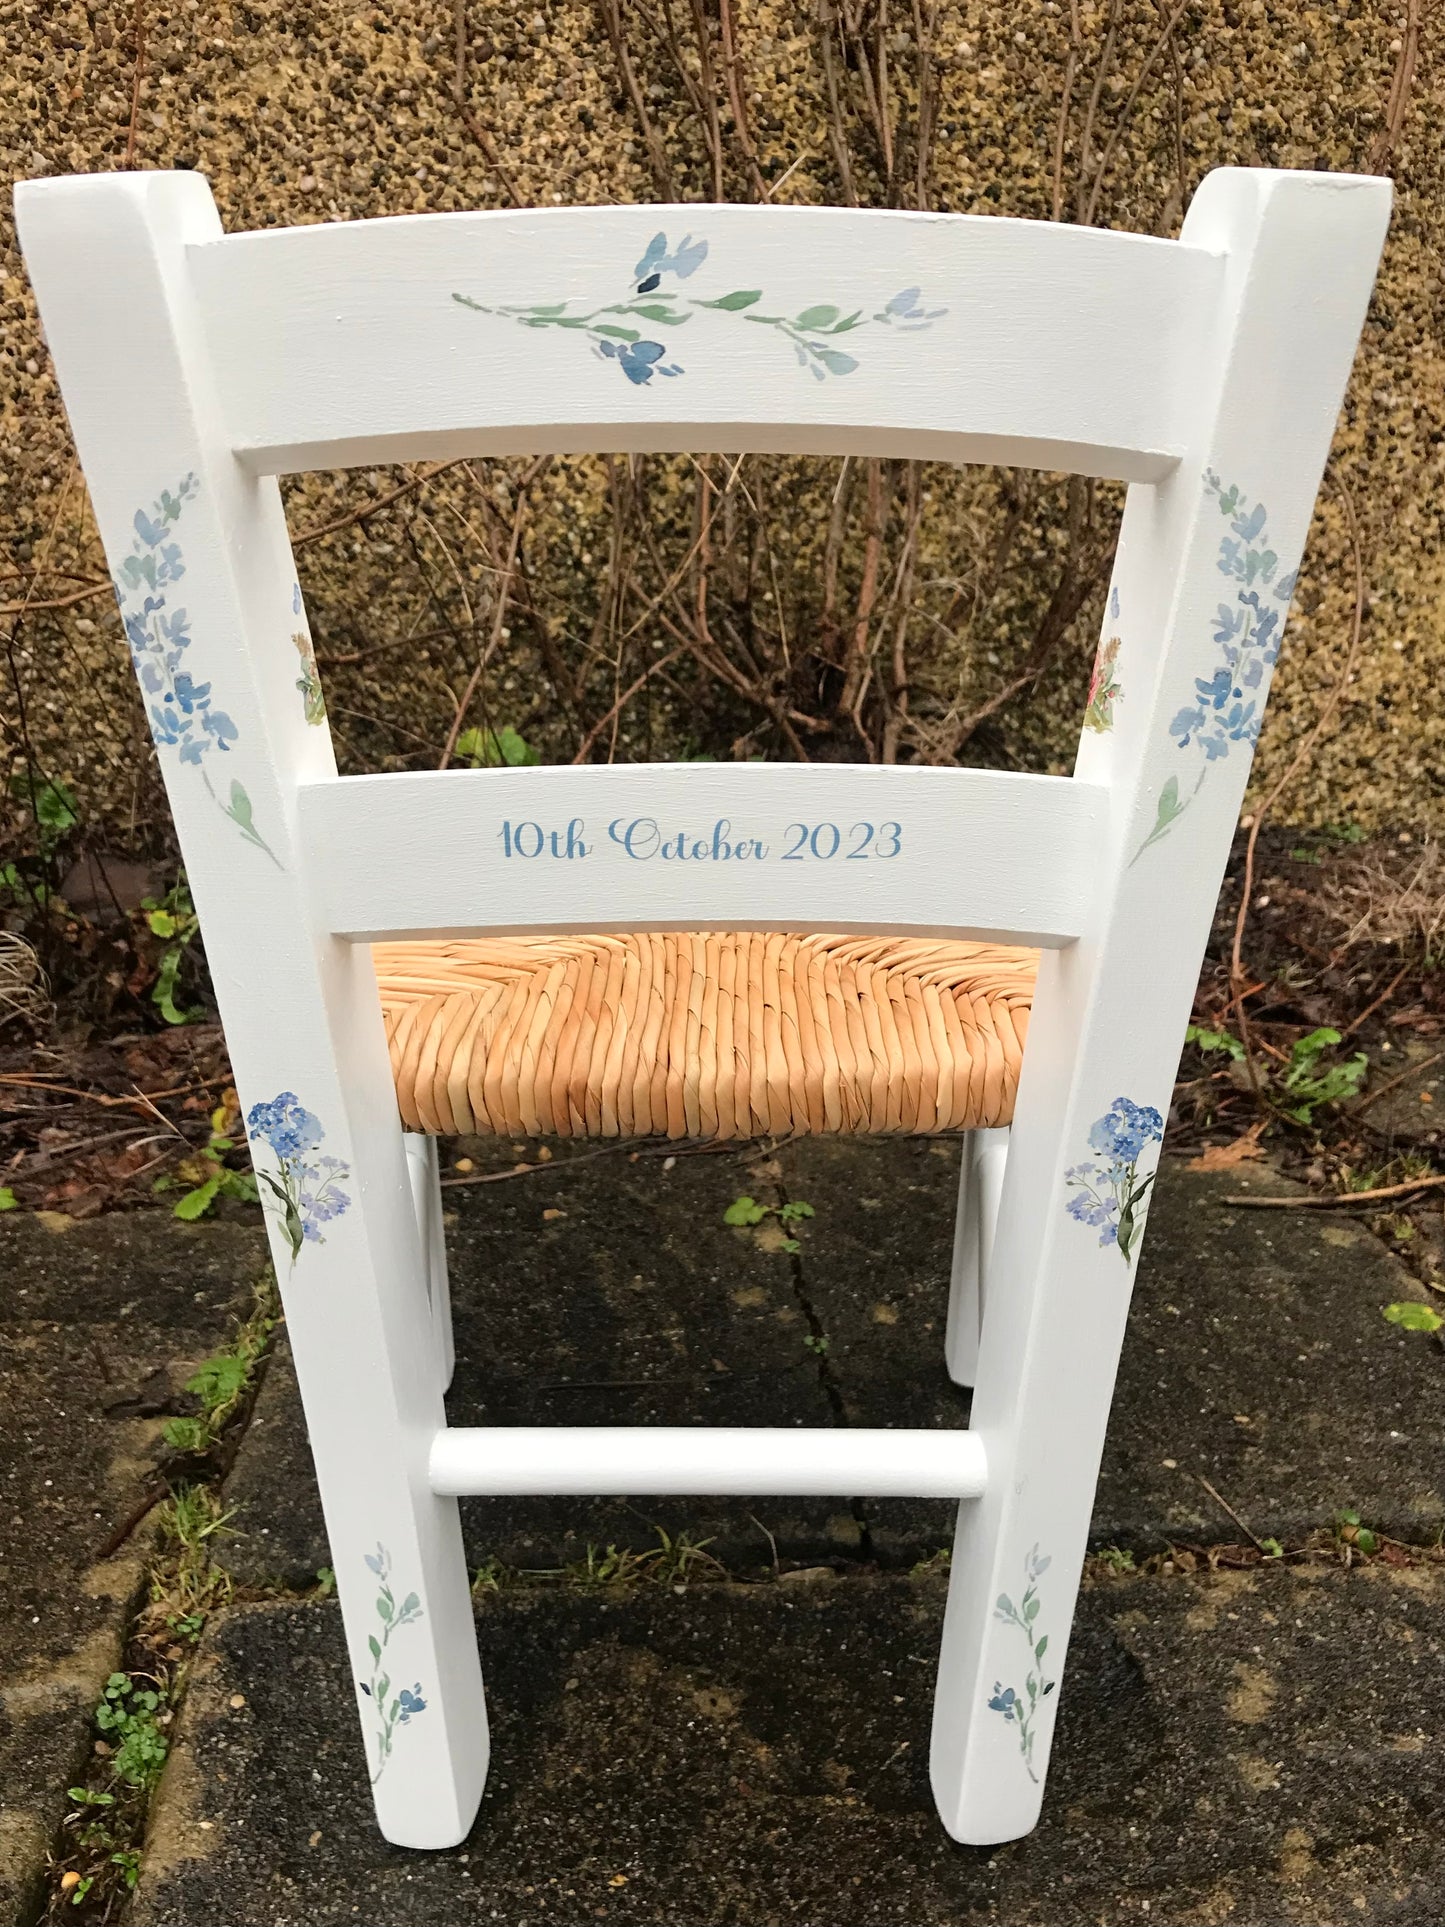 Rush seat personalised children's chair - Beatrix Potter Peter Rabbit flowers theme - made to order